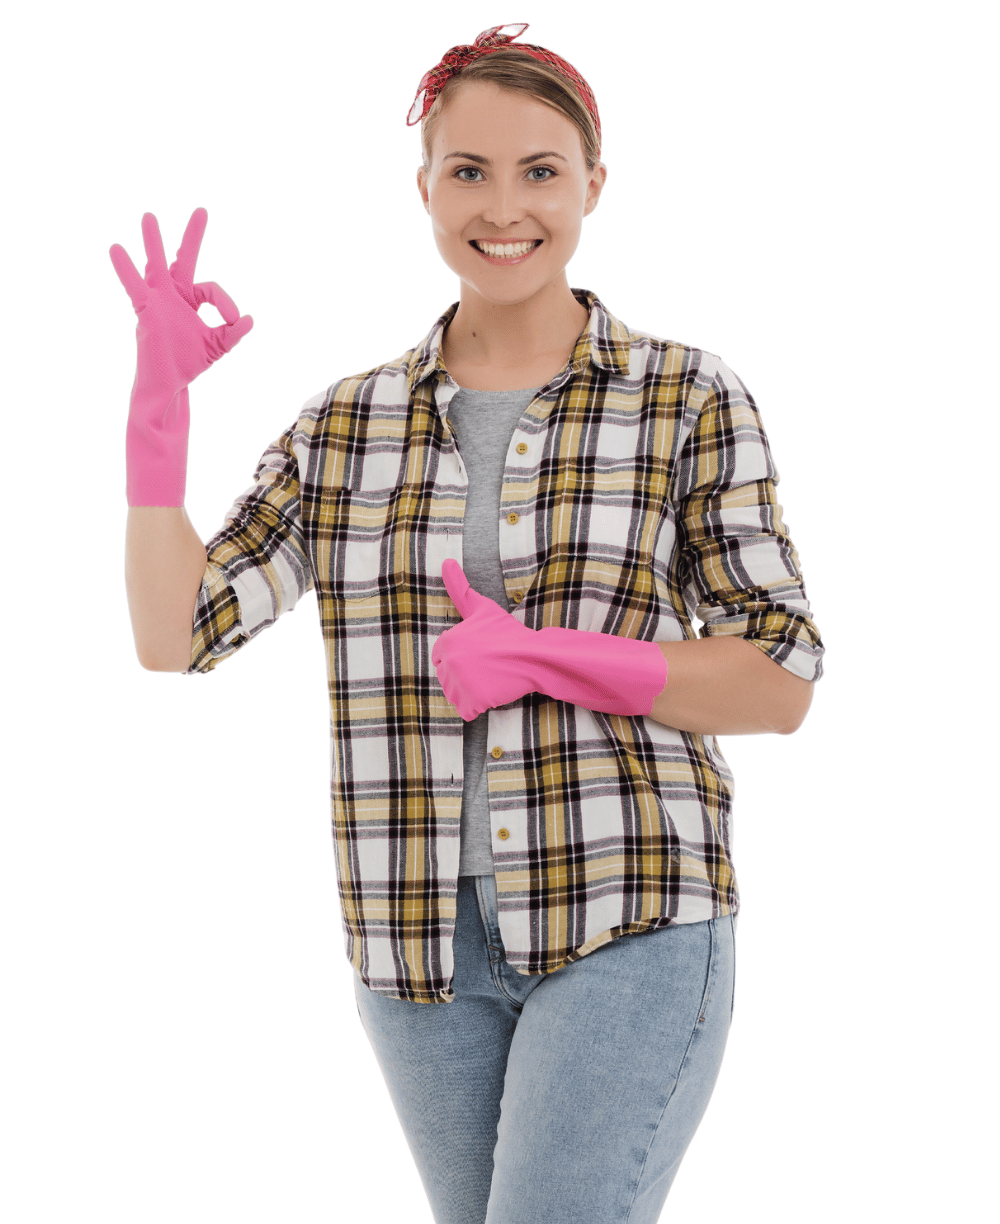 A female house cleaner expressing approval with an 'OK' gesture and thumbs-up.